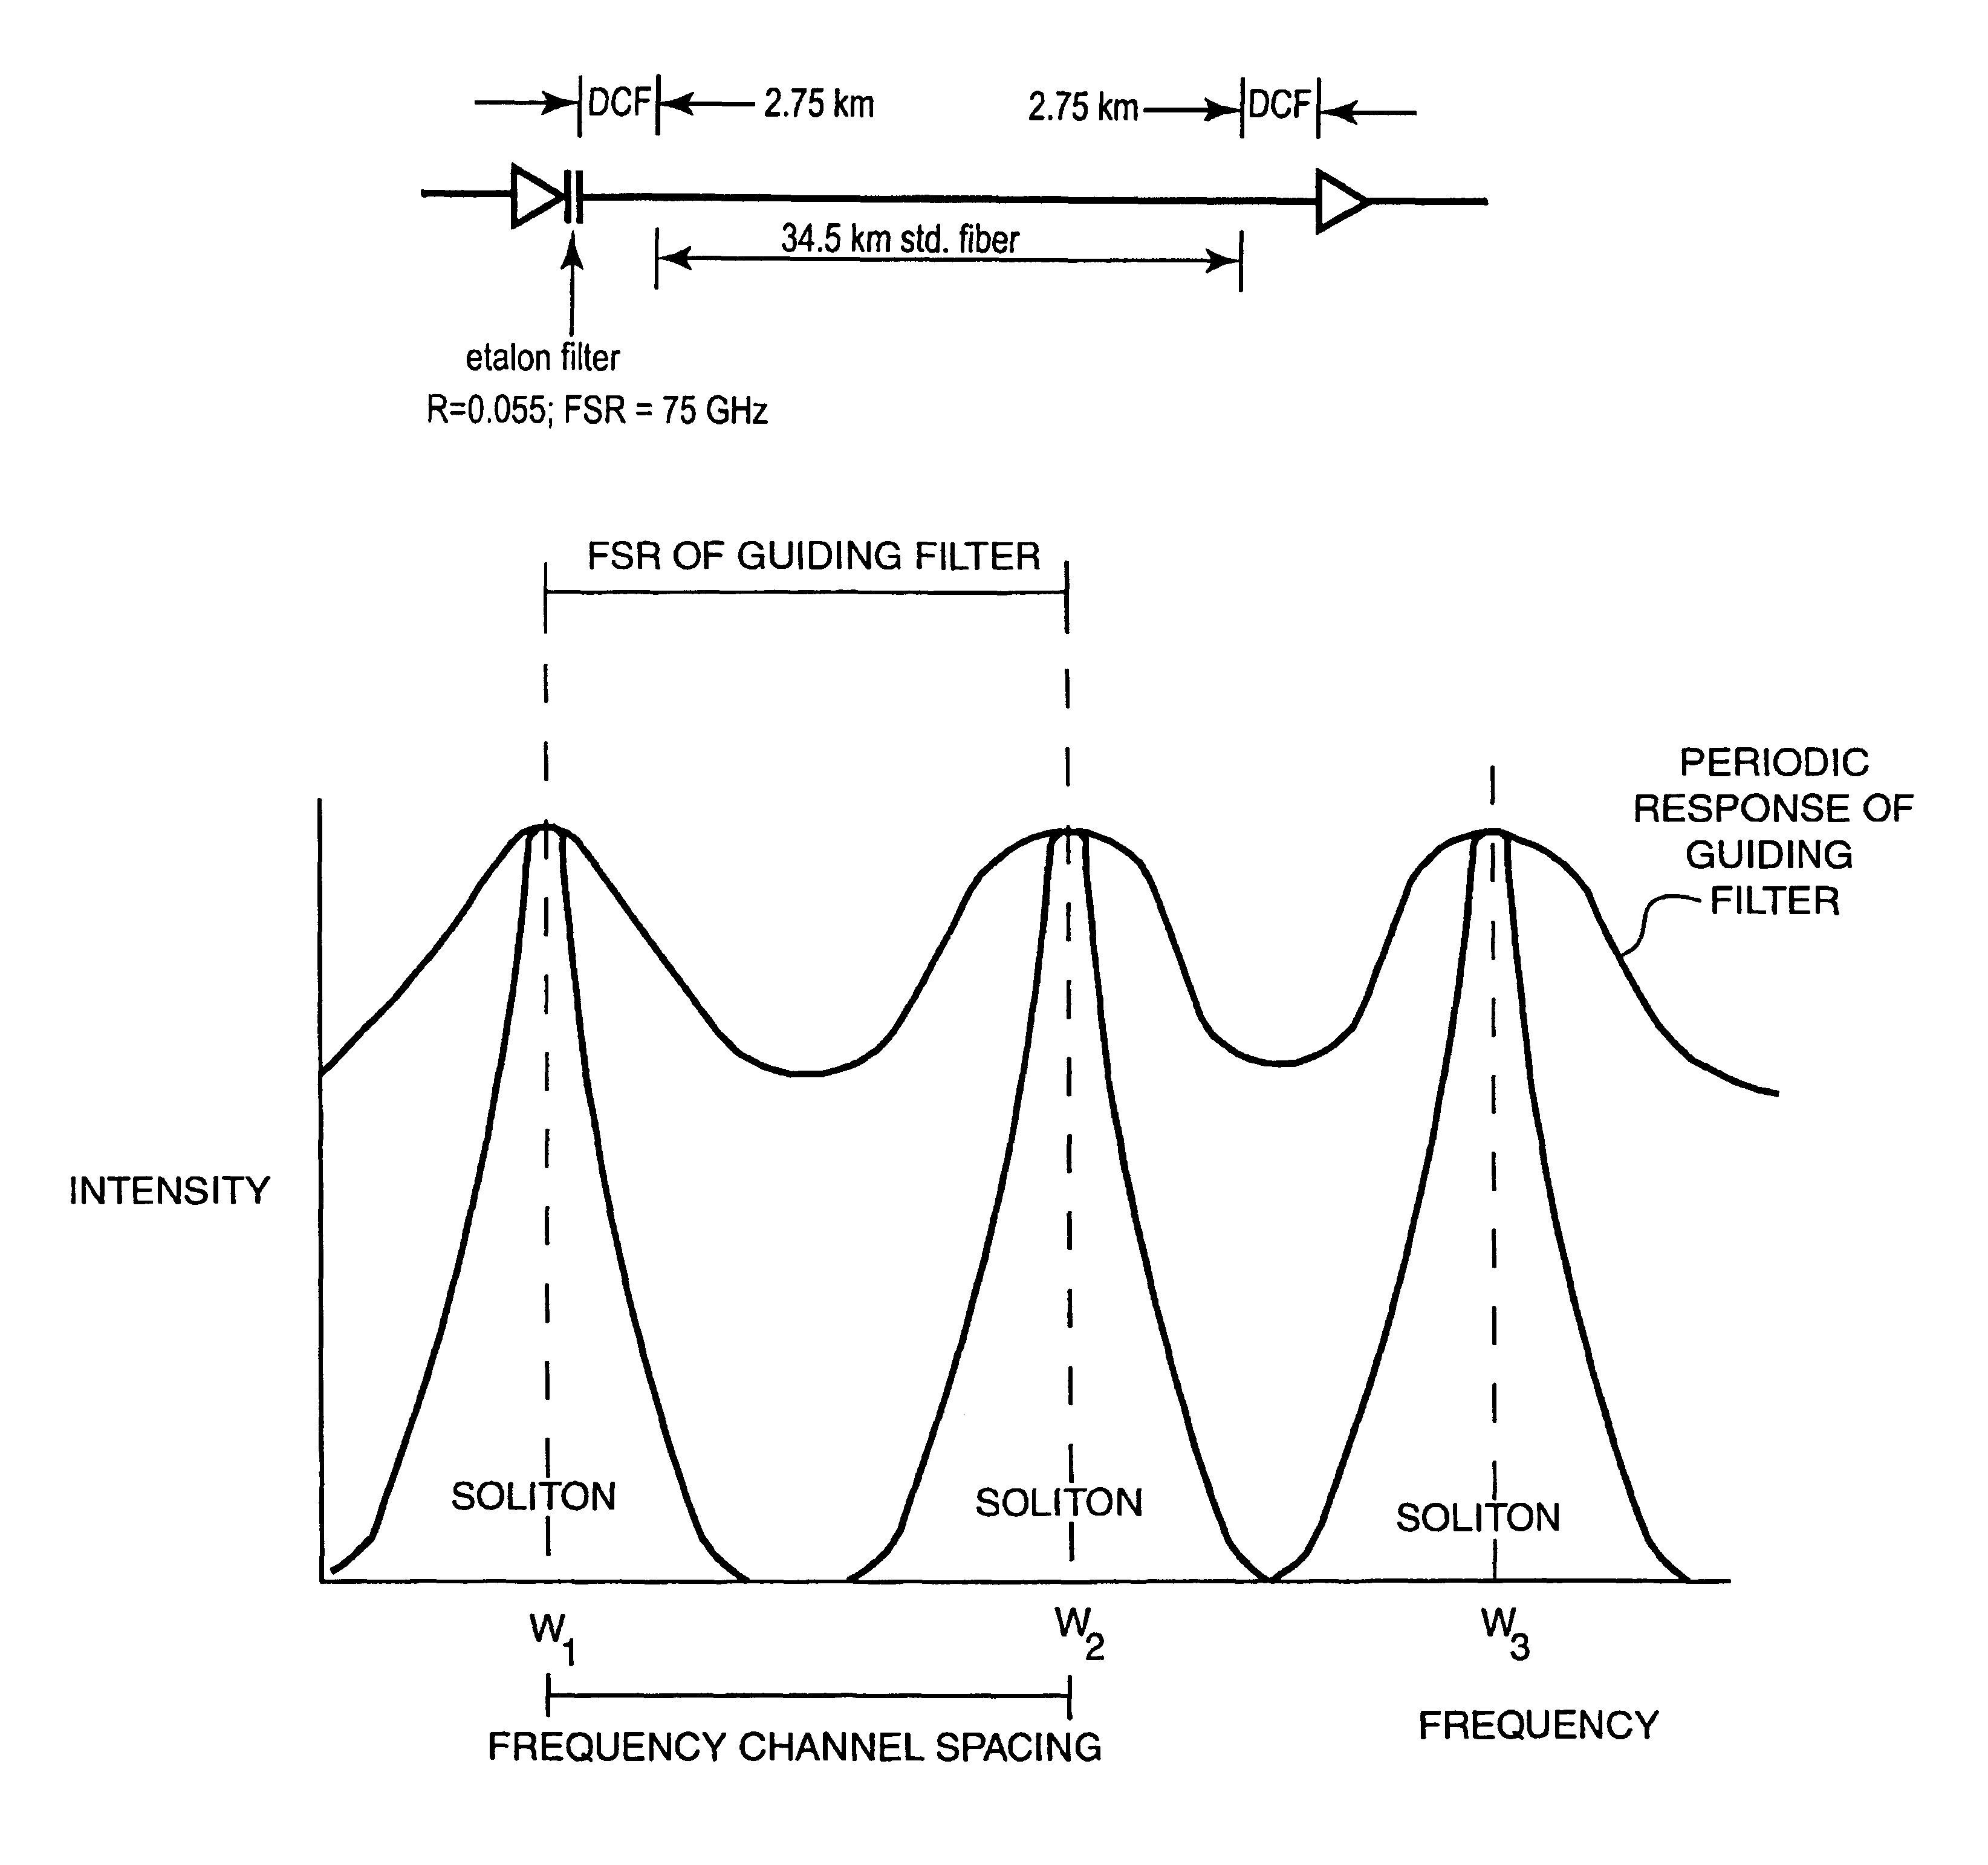 Dispersion-managed soliton transmission system with guiding filters